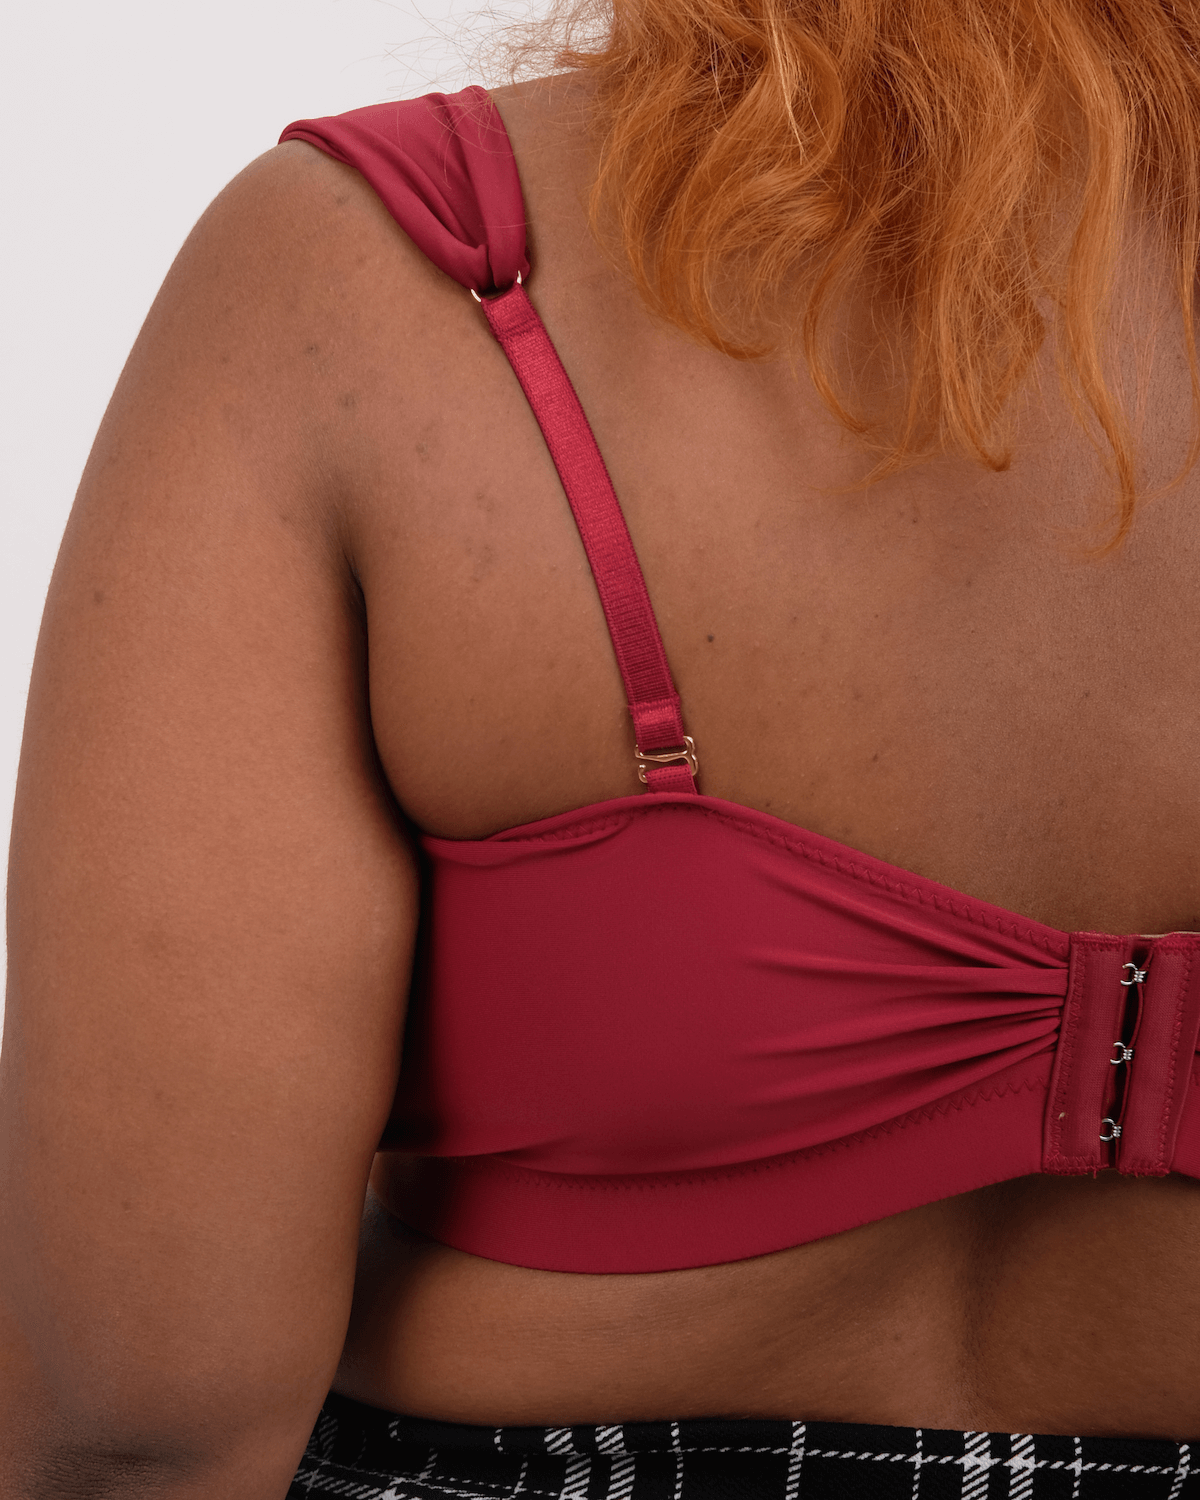 knotty padded strapless bralette in maroon – Our Bralette Club